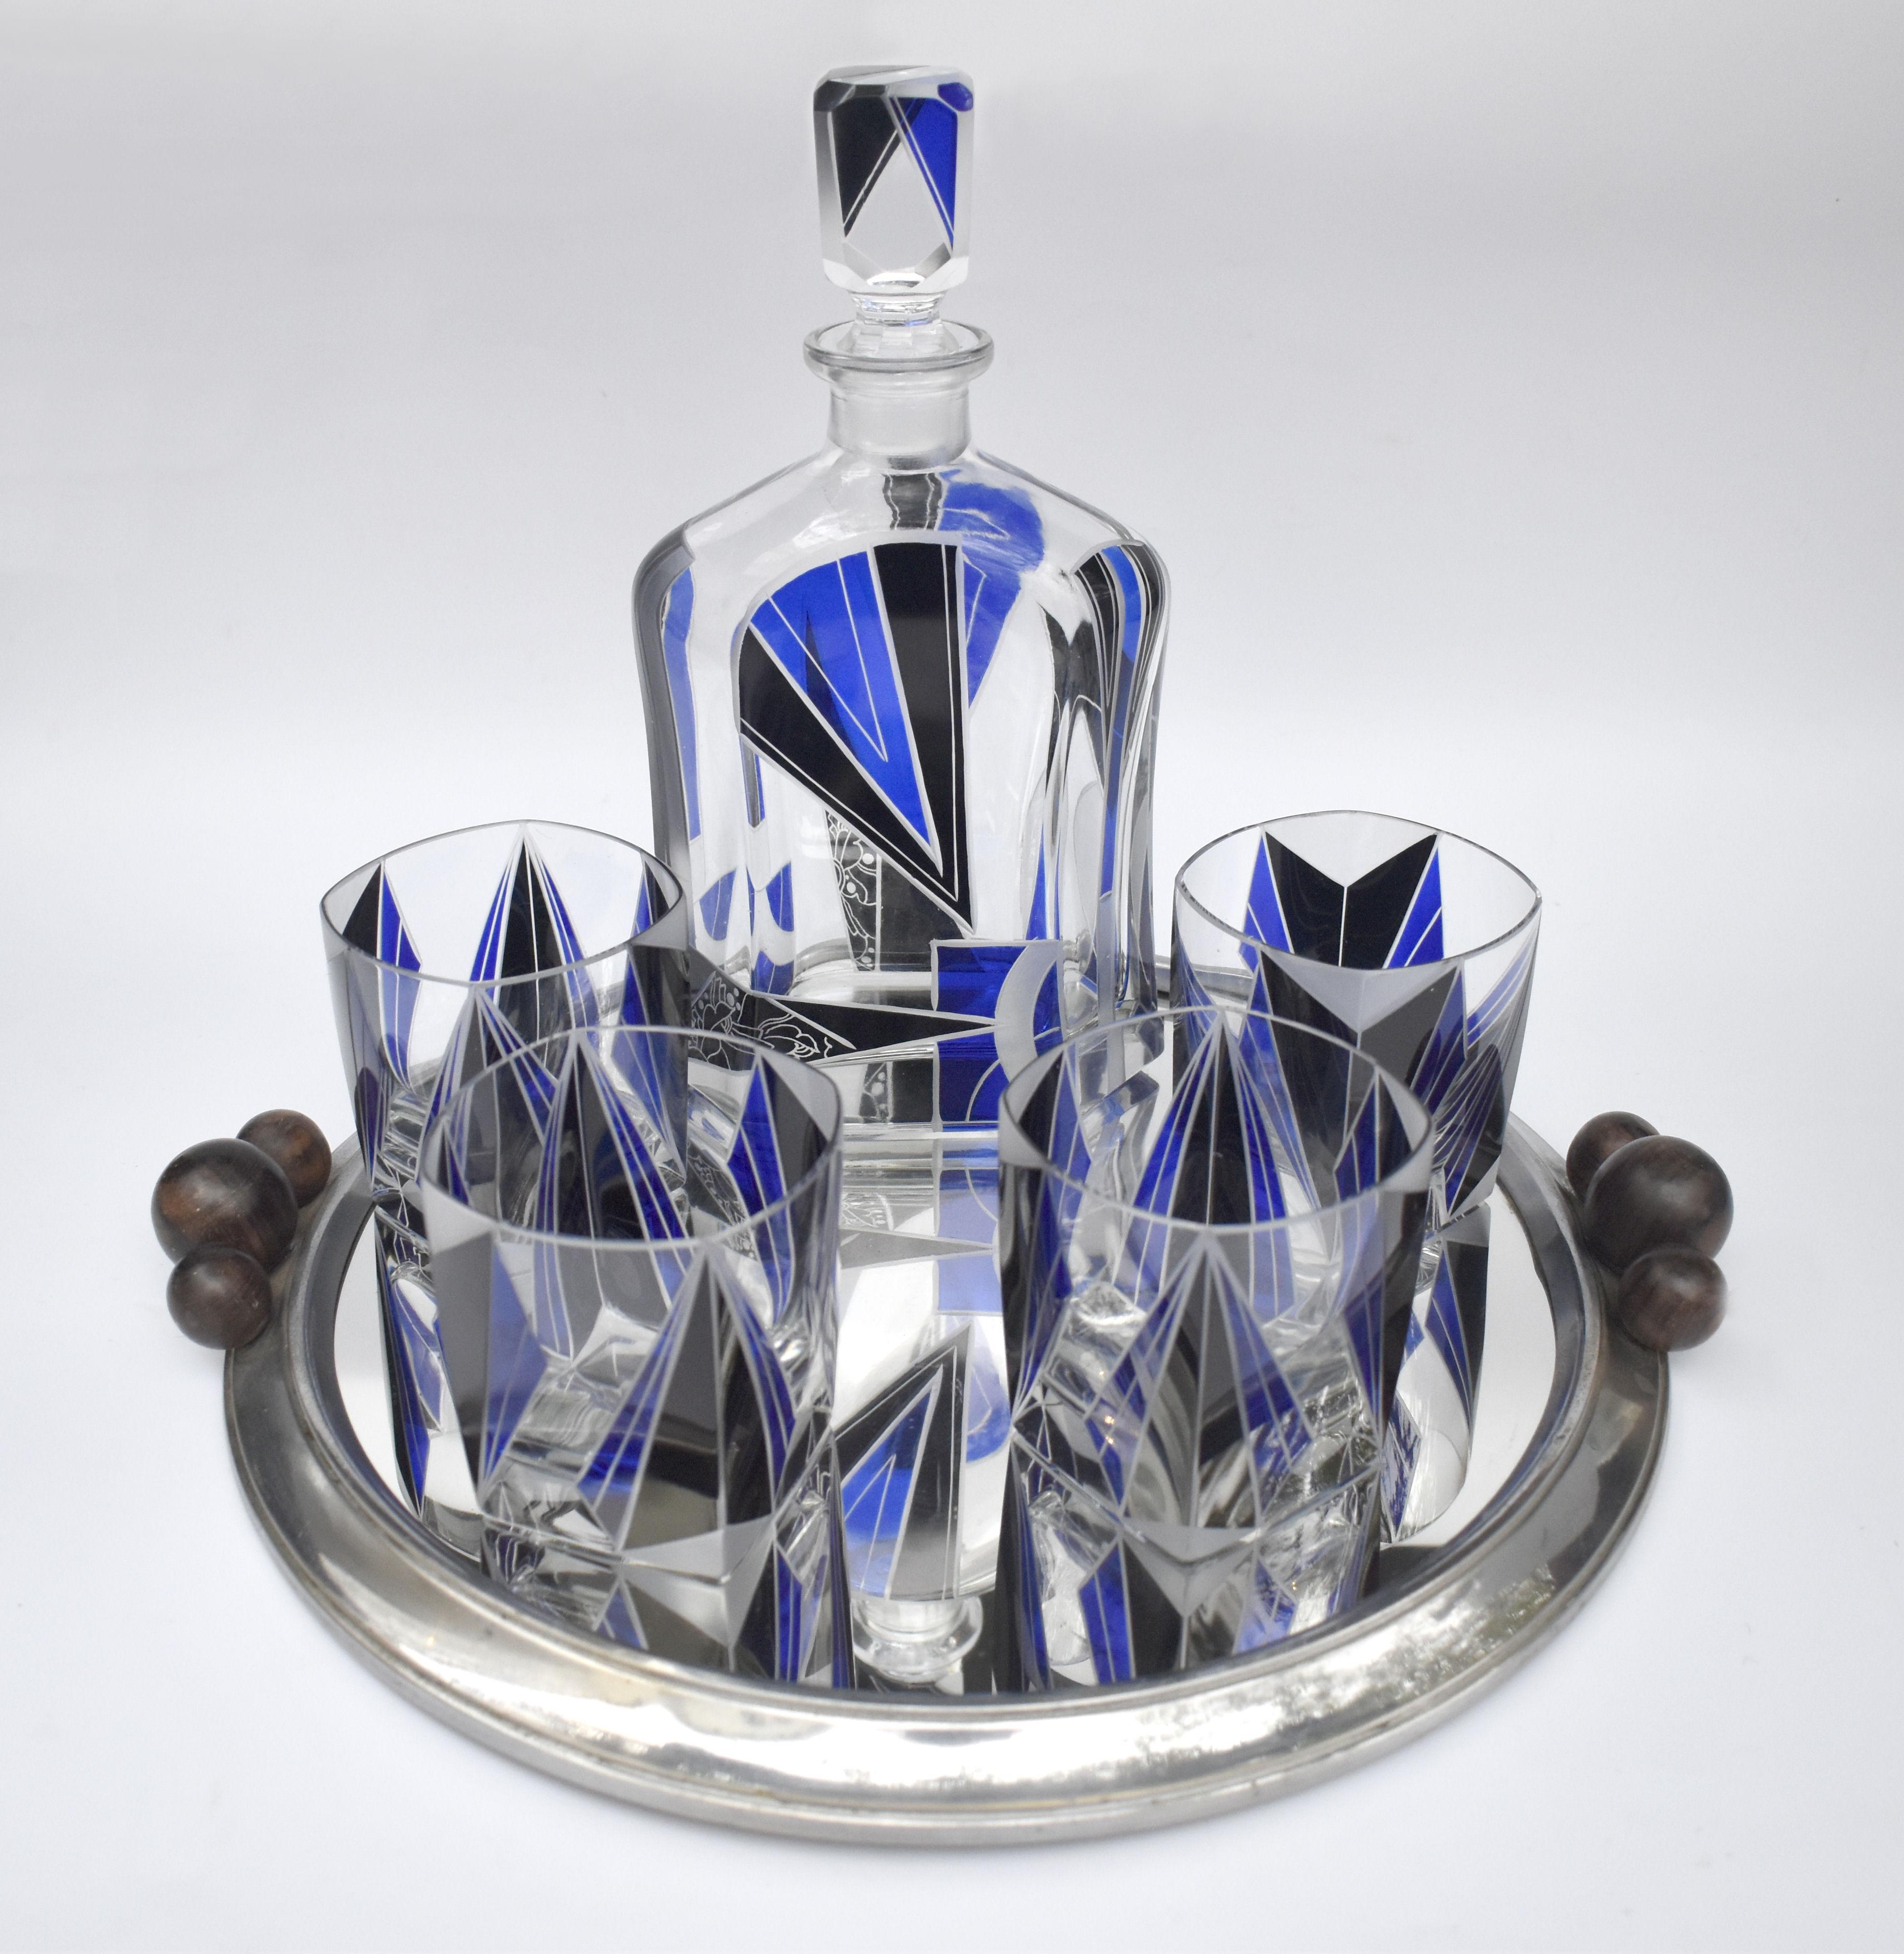 Extremely stylish Art Deco decanter set dating to the 1930's and originating from Prague, Czech Republic. Geometric enamelling in black & royal blue decorates the attractive and stunning shape glasses & decanter. Comprises decanter with stopper and